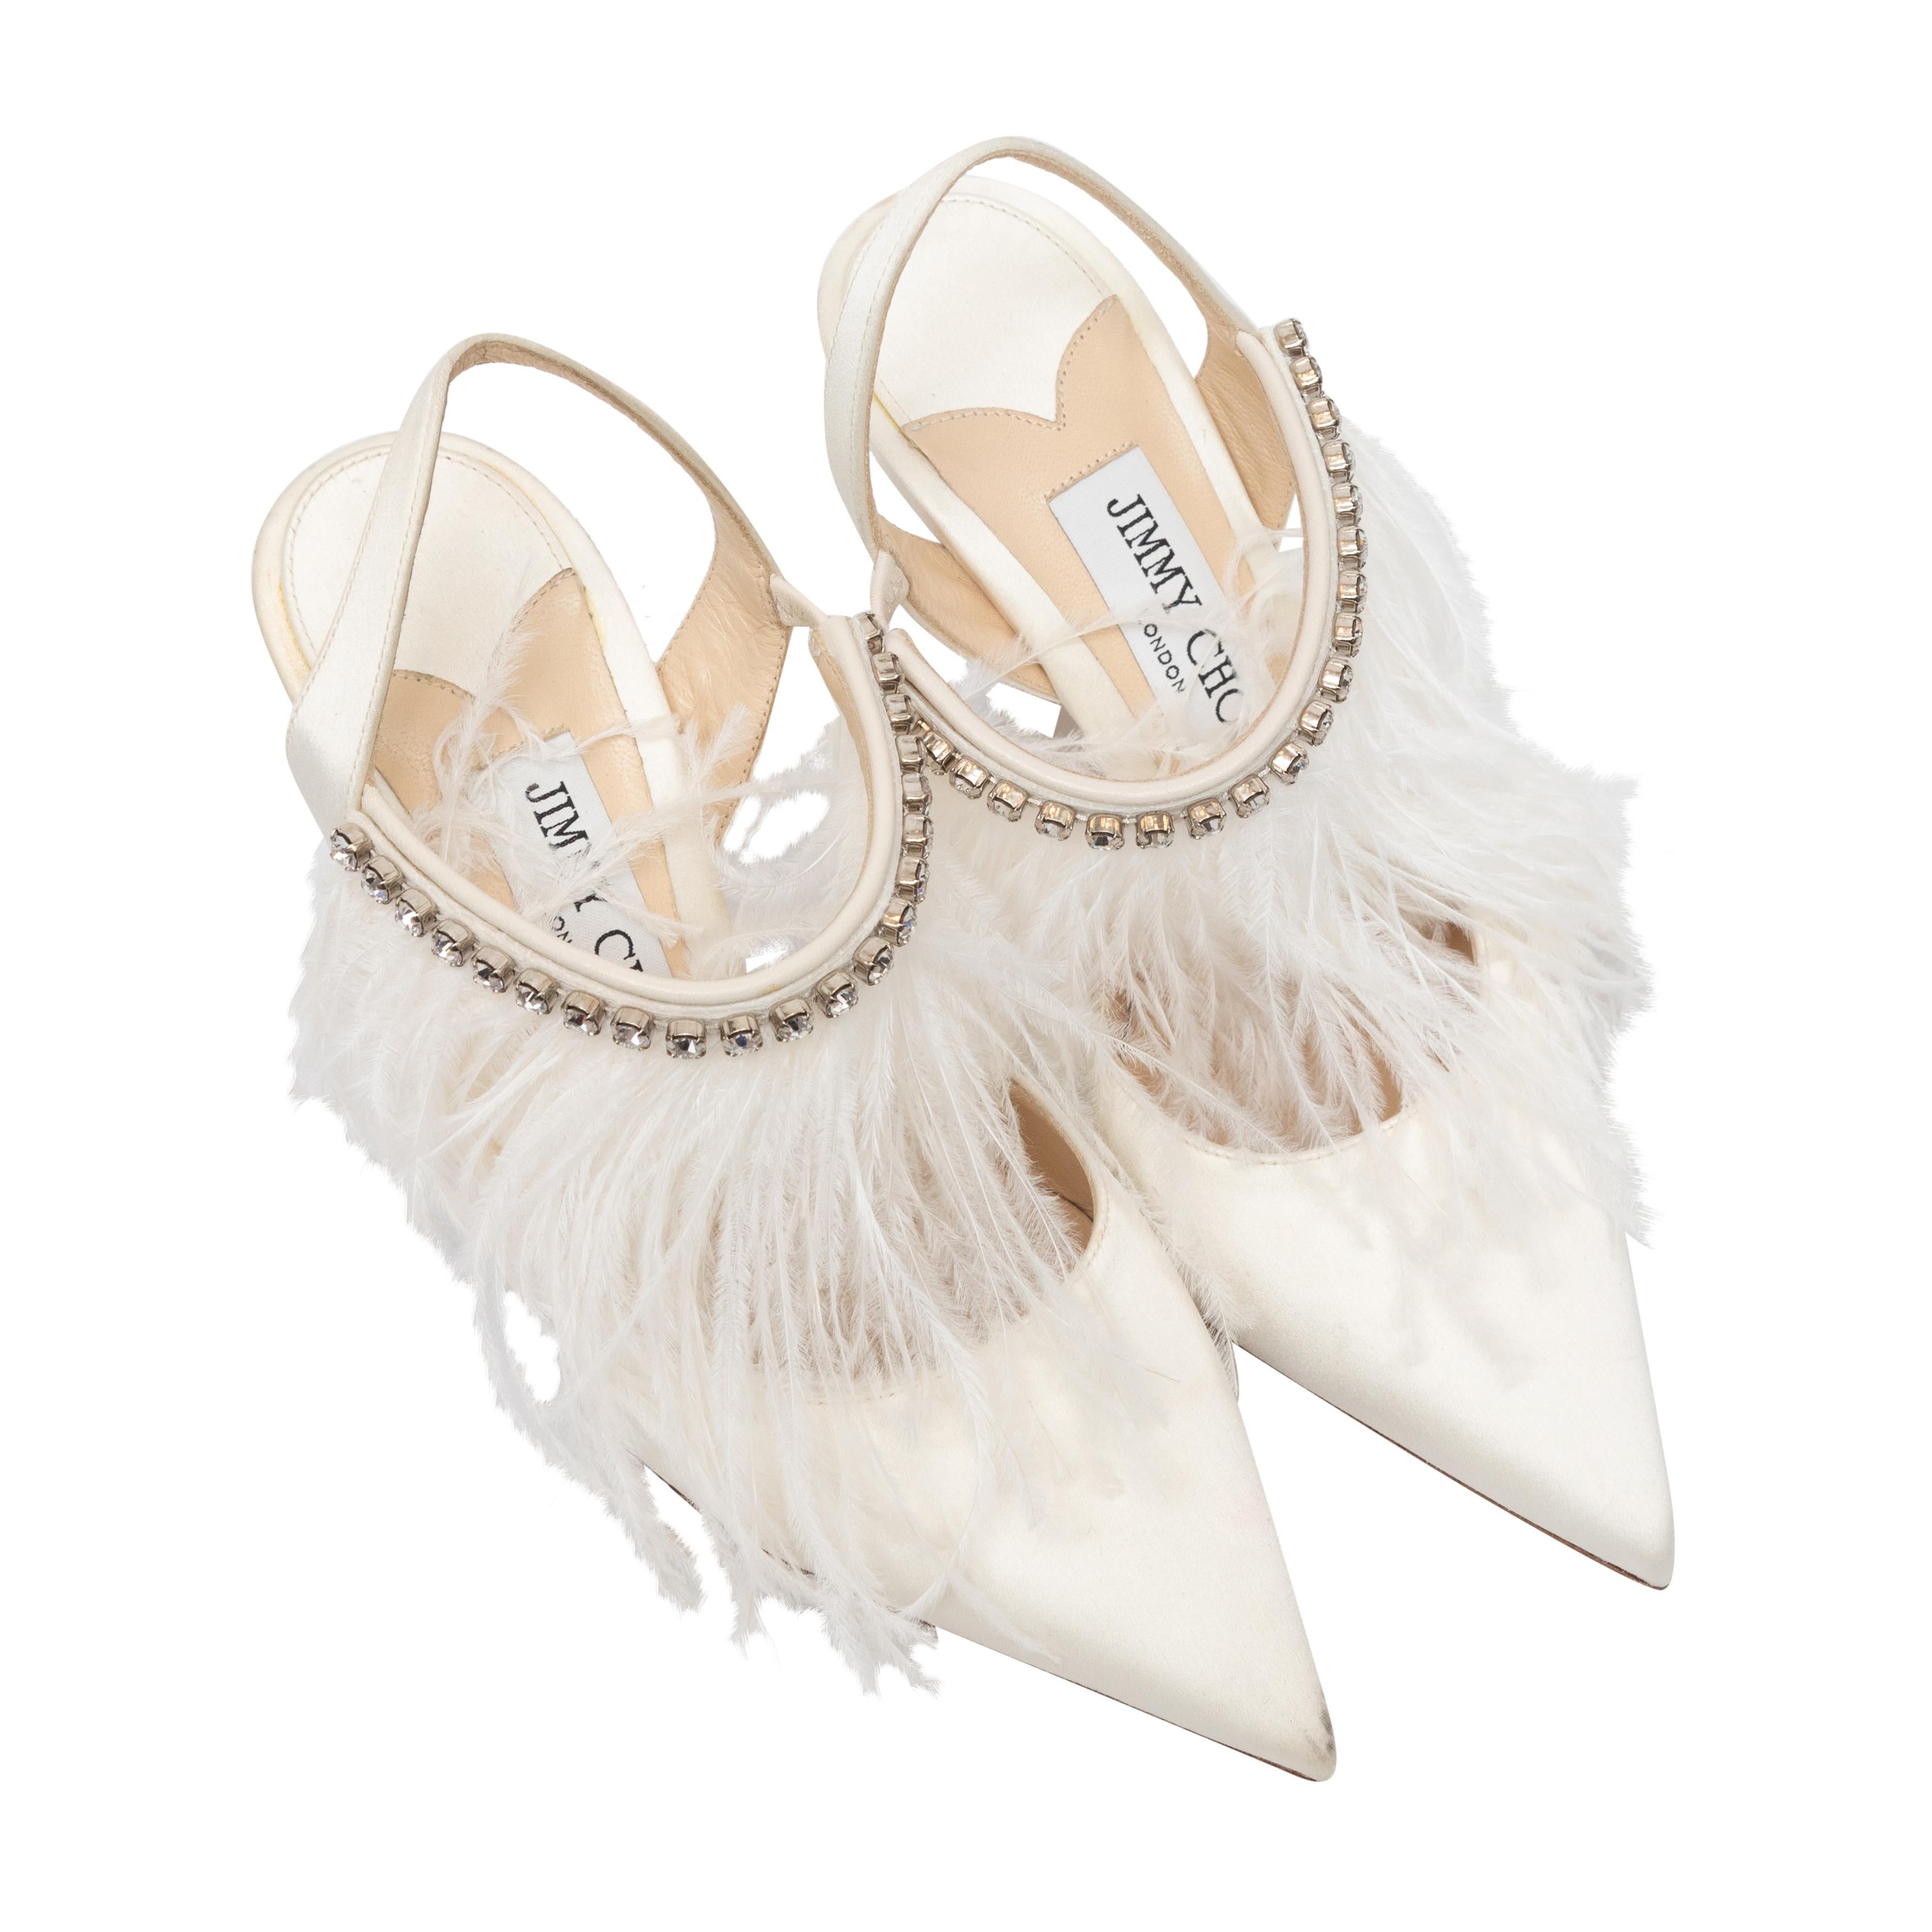 White satin ostrich feather and crystal-embellished pointed-toe slingbacks by Jimmy Choo. 3